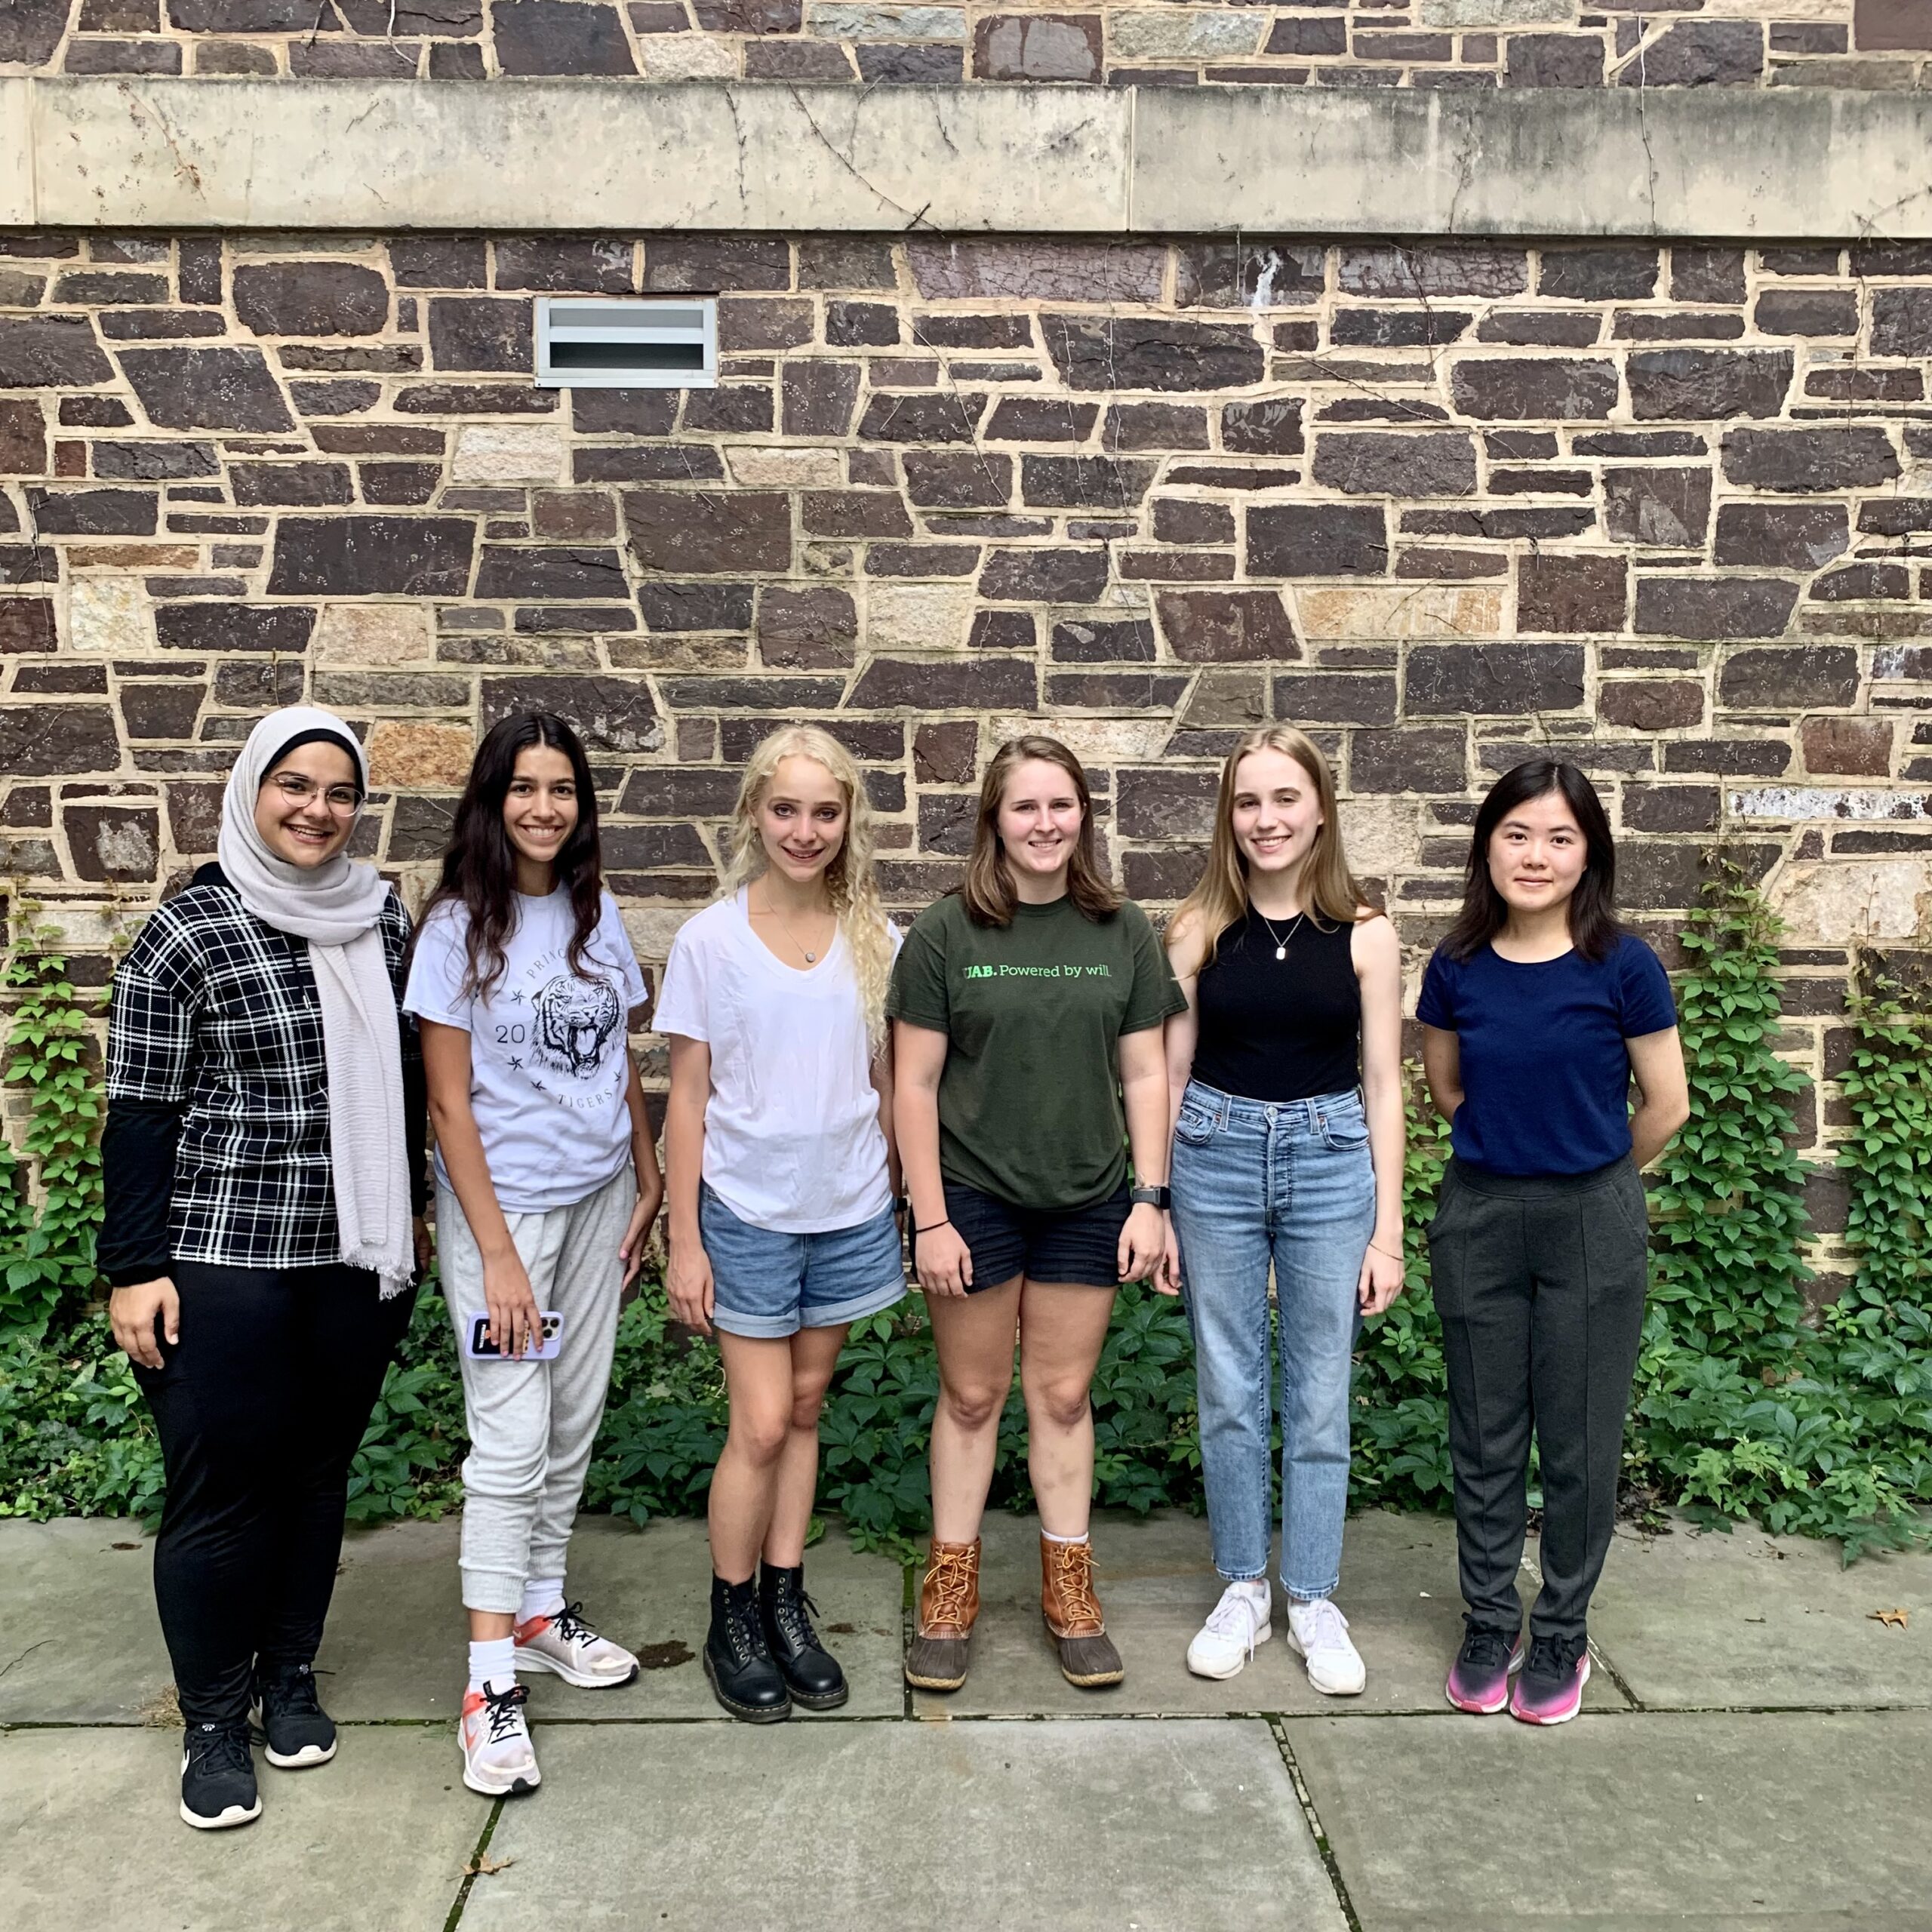 Image depicts six women (PCUR 22-23) in front of a gray brick building with bright green ivy